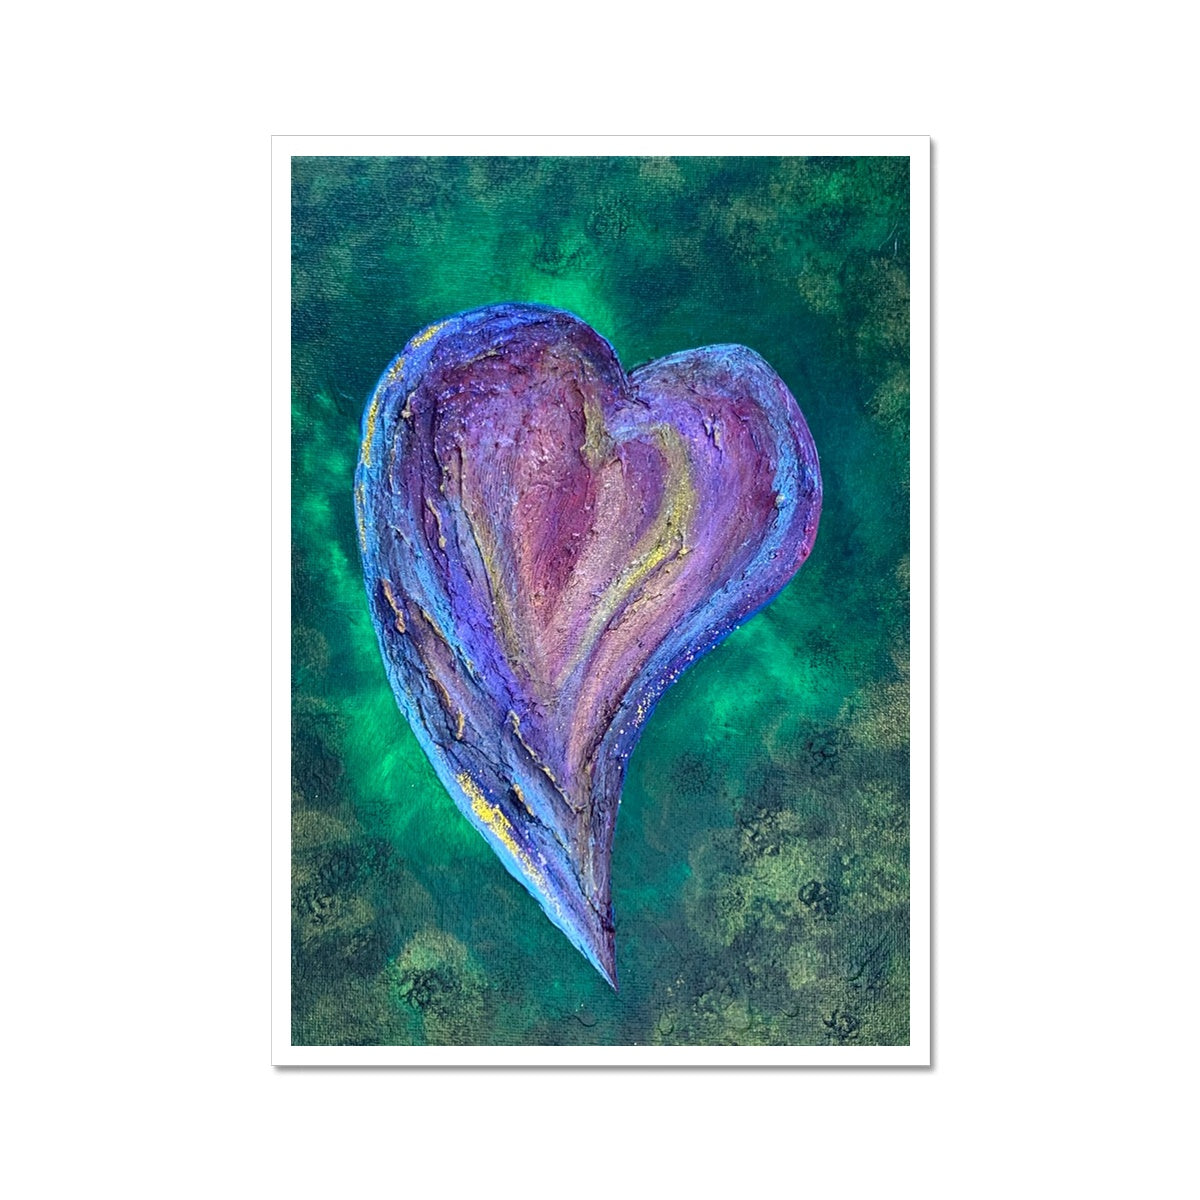 My Love for You  - Memorial Print sby Sue Davies © at https://suedavies.co.uk